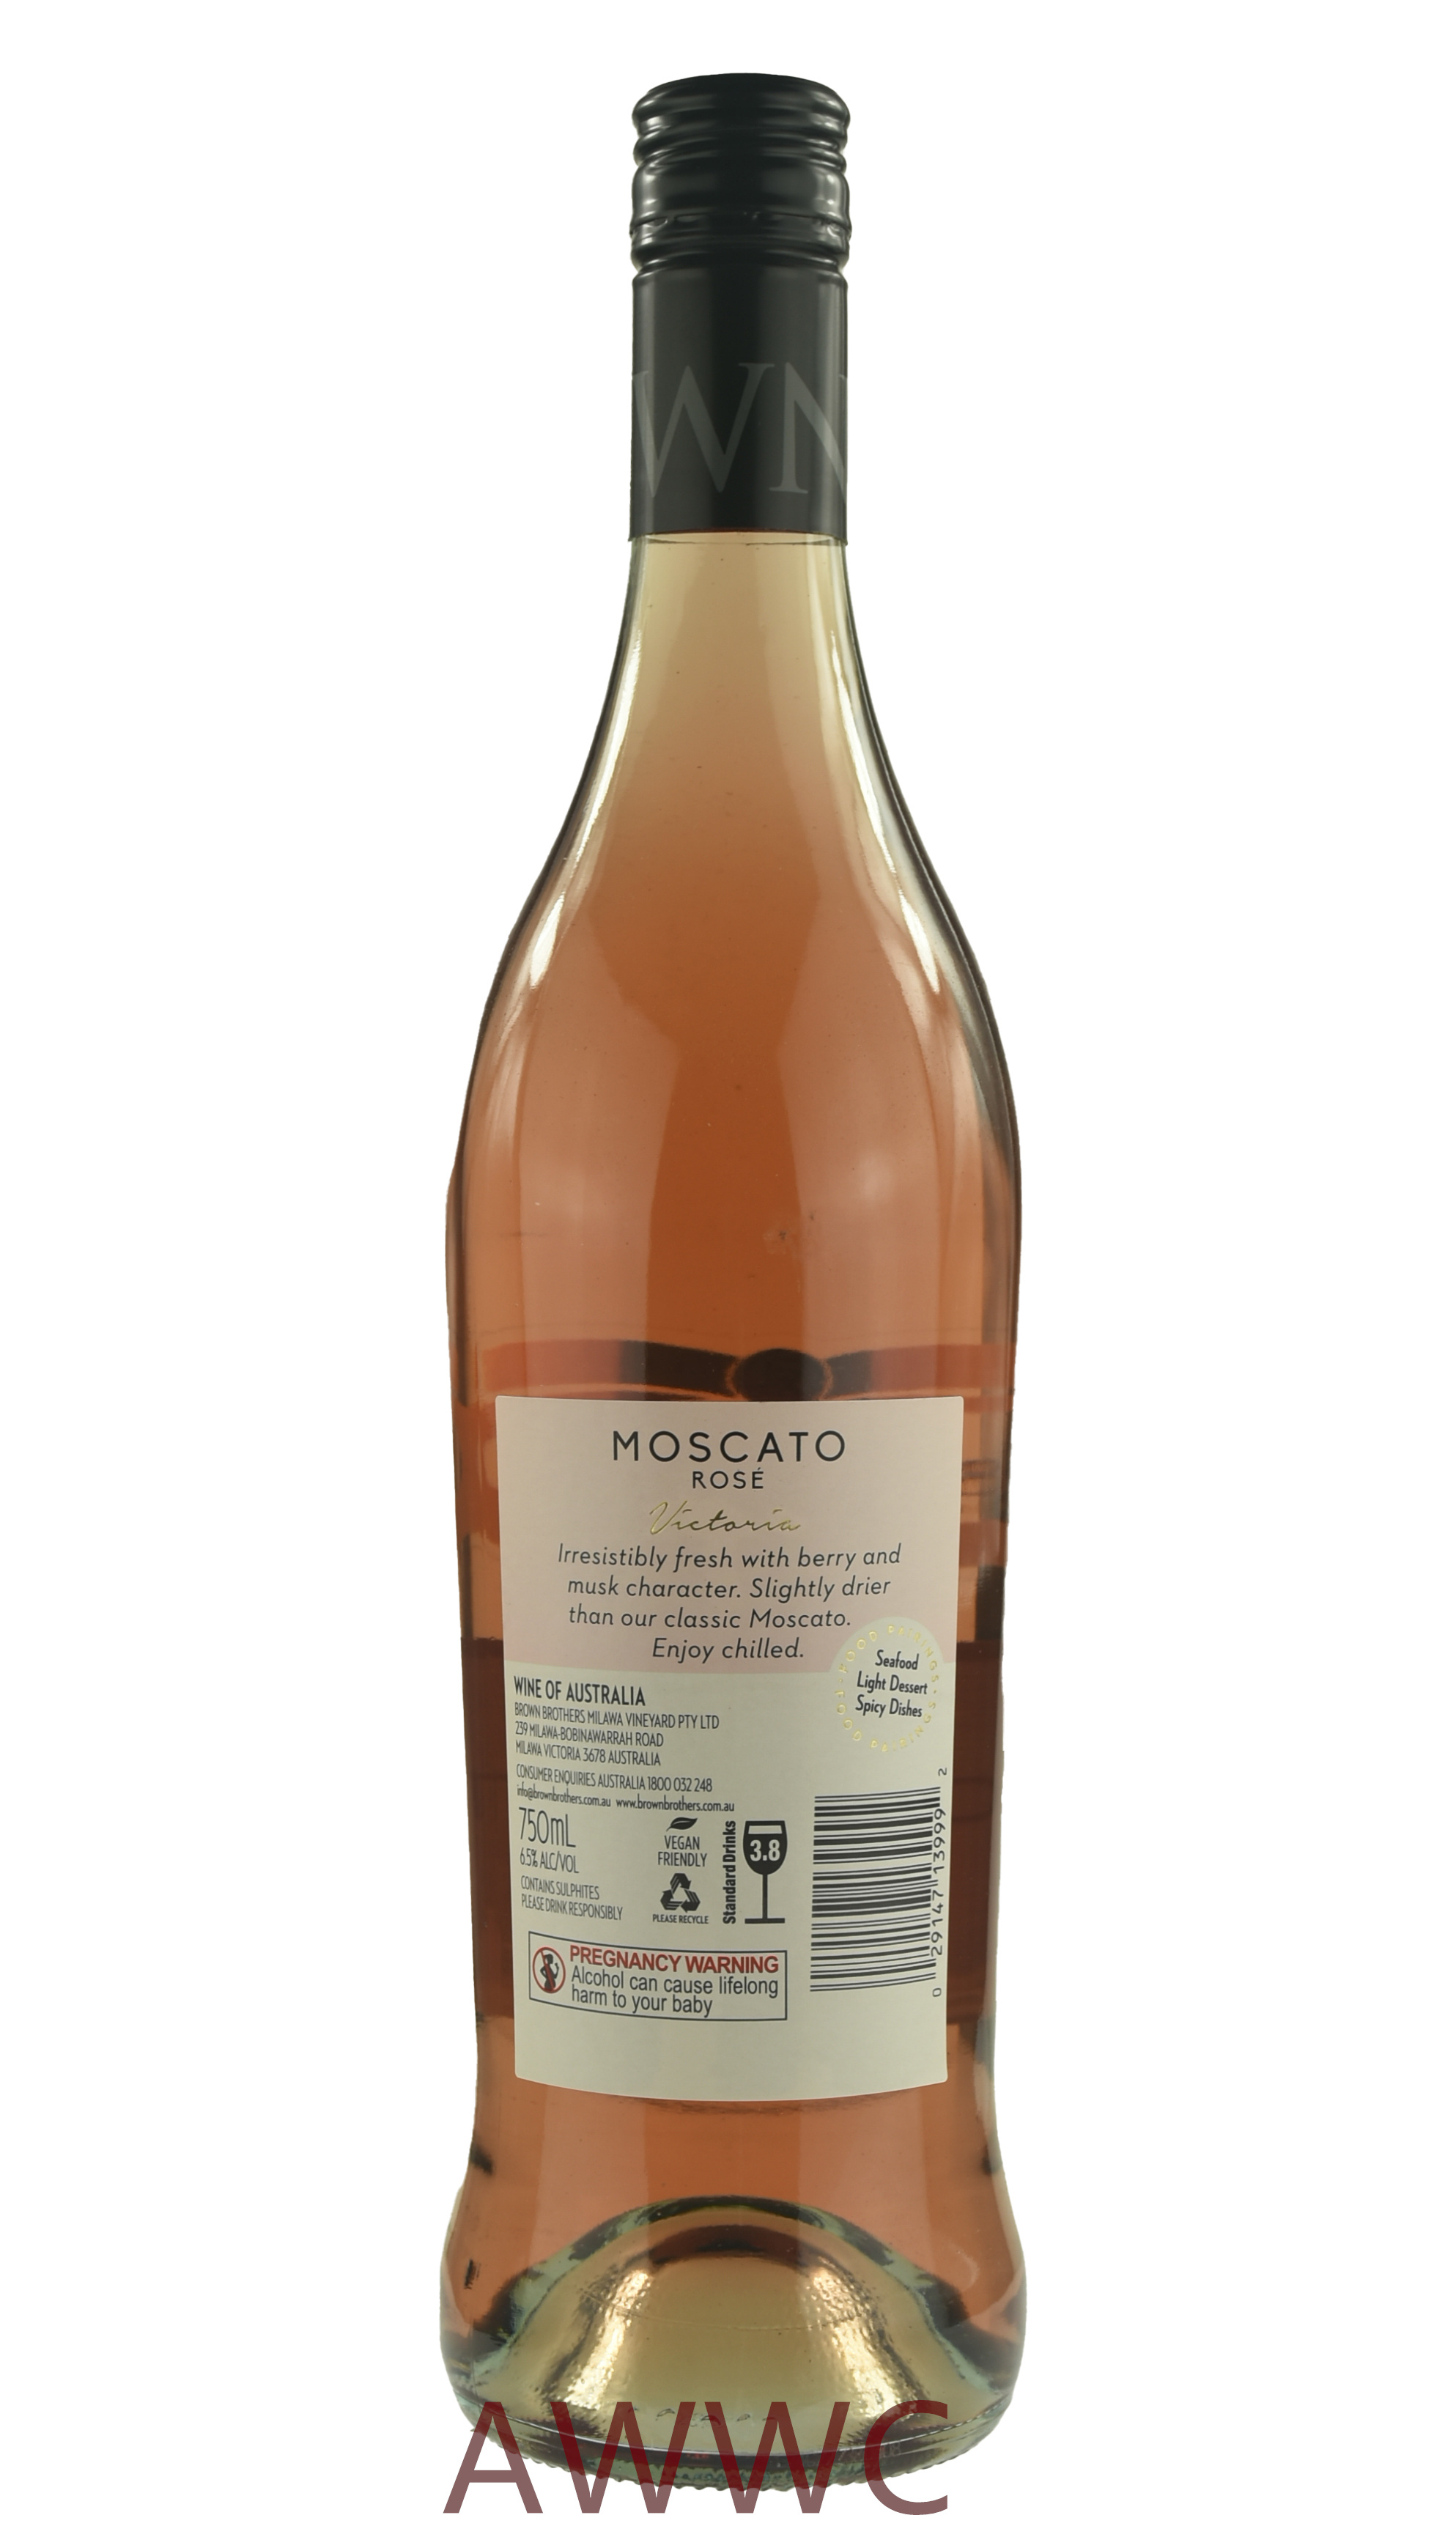 Brown Brothers Mascato Rose 2022